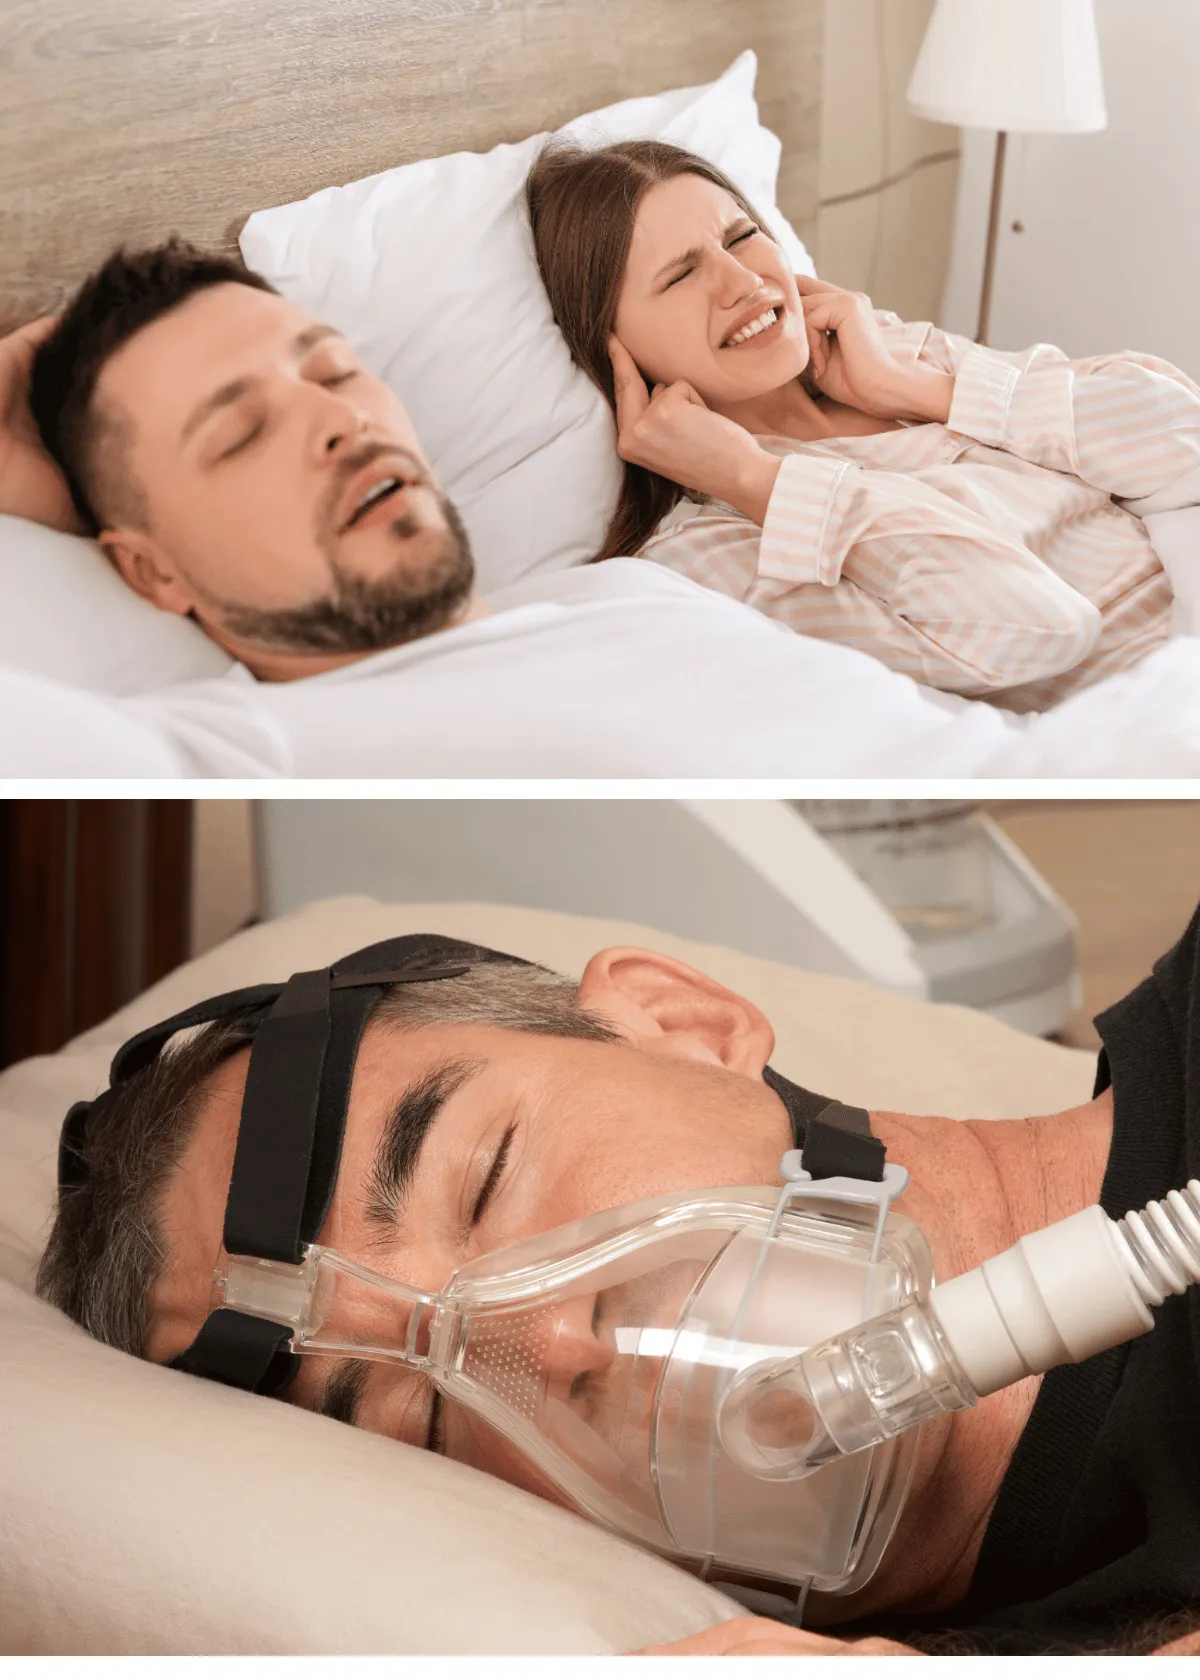 "Say Goodbye to Restless Nights with AIRLIFT Sleep Apnea"